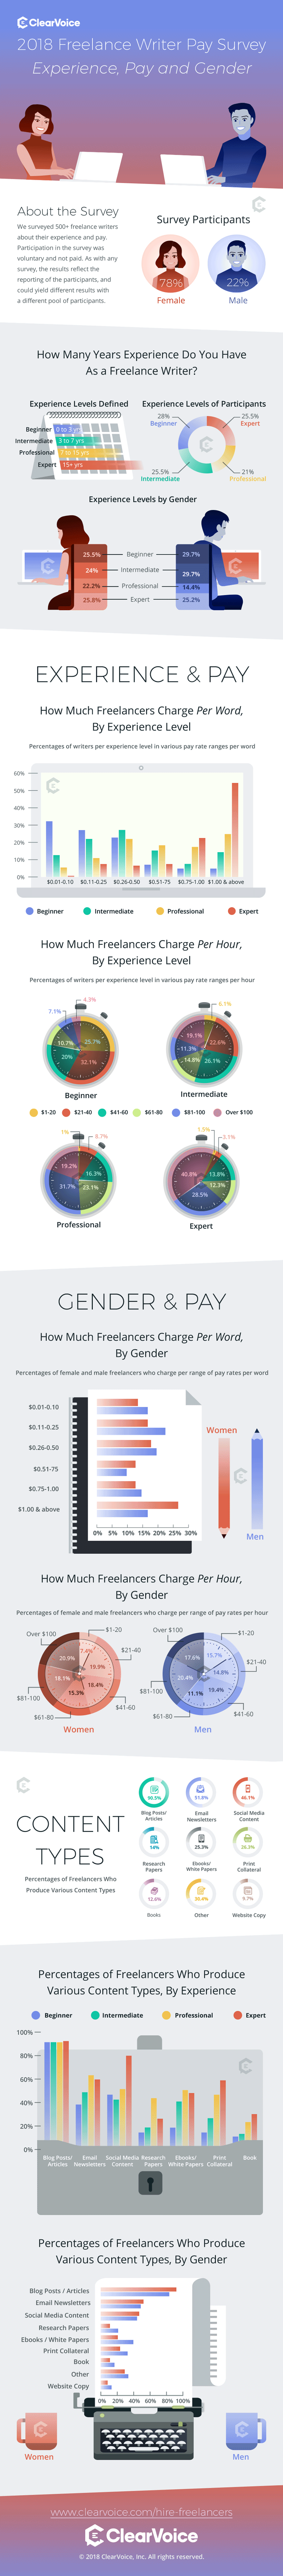 2018 Survey Results: How Much Should I Pay a Freelance Writer? [Infographic]